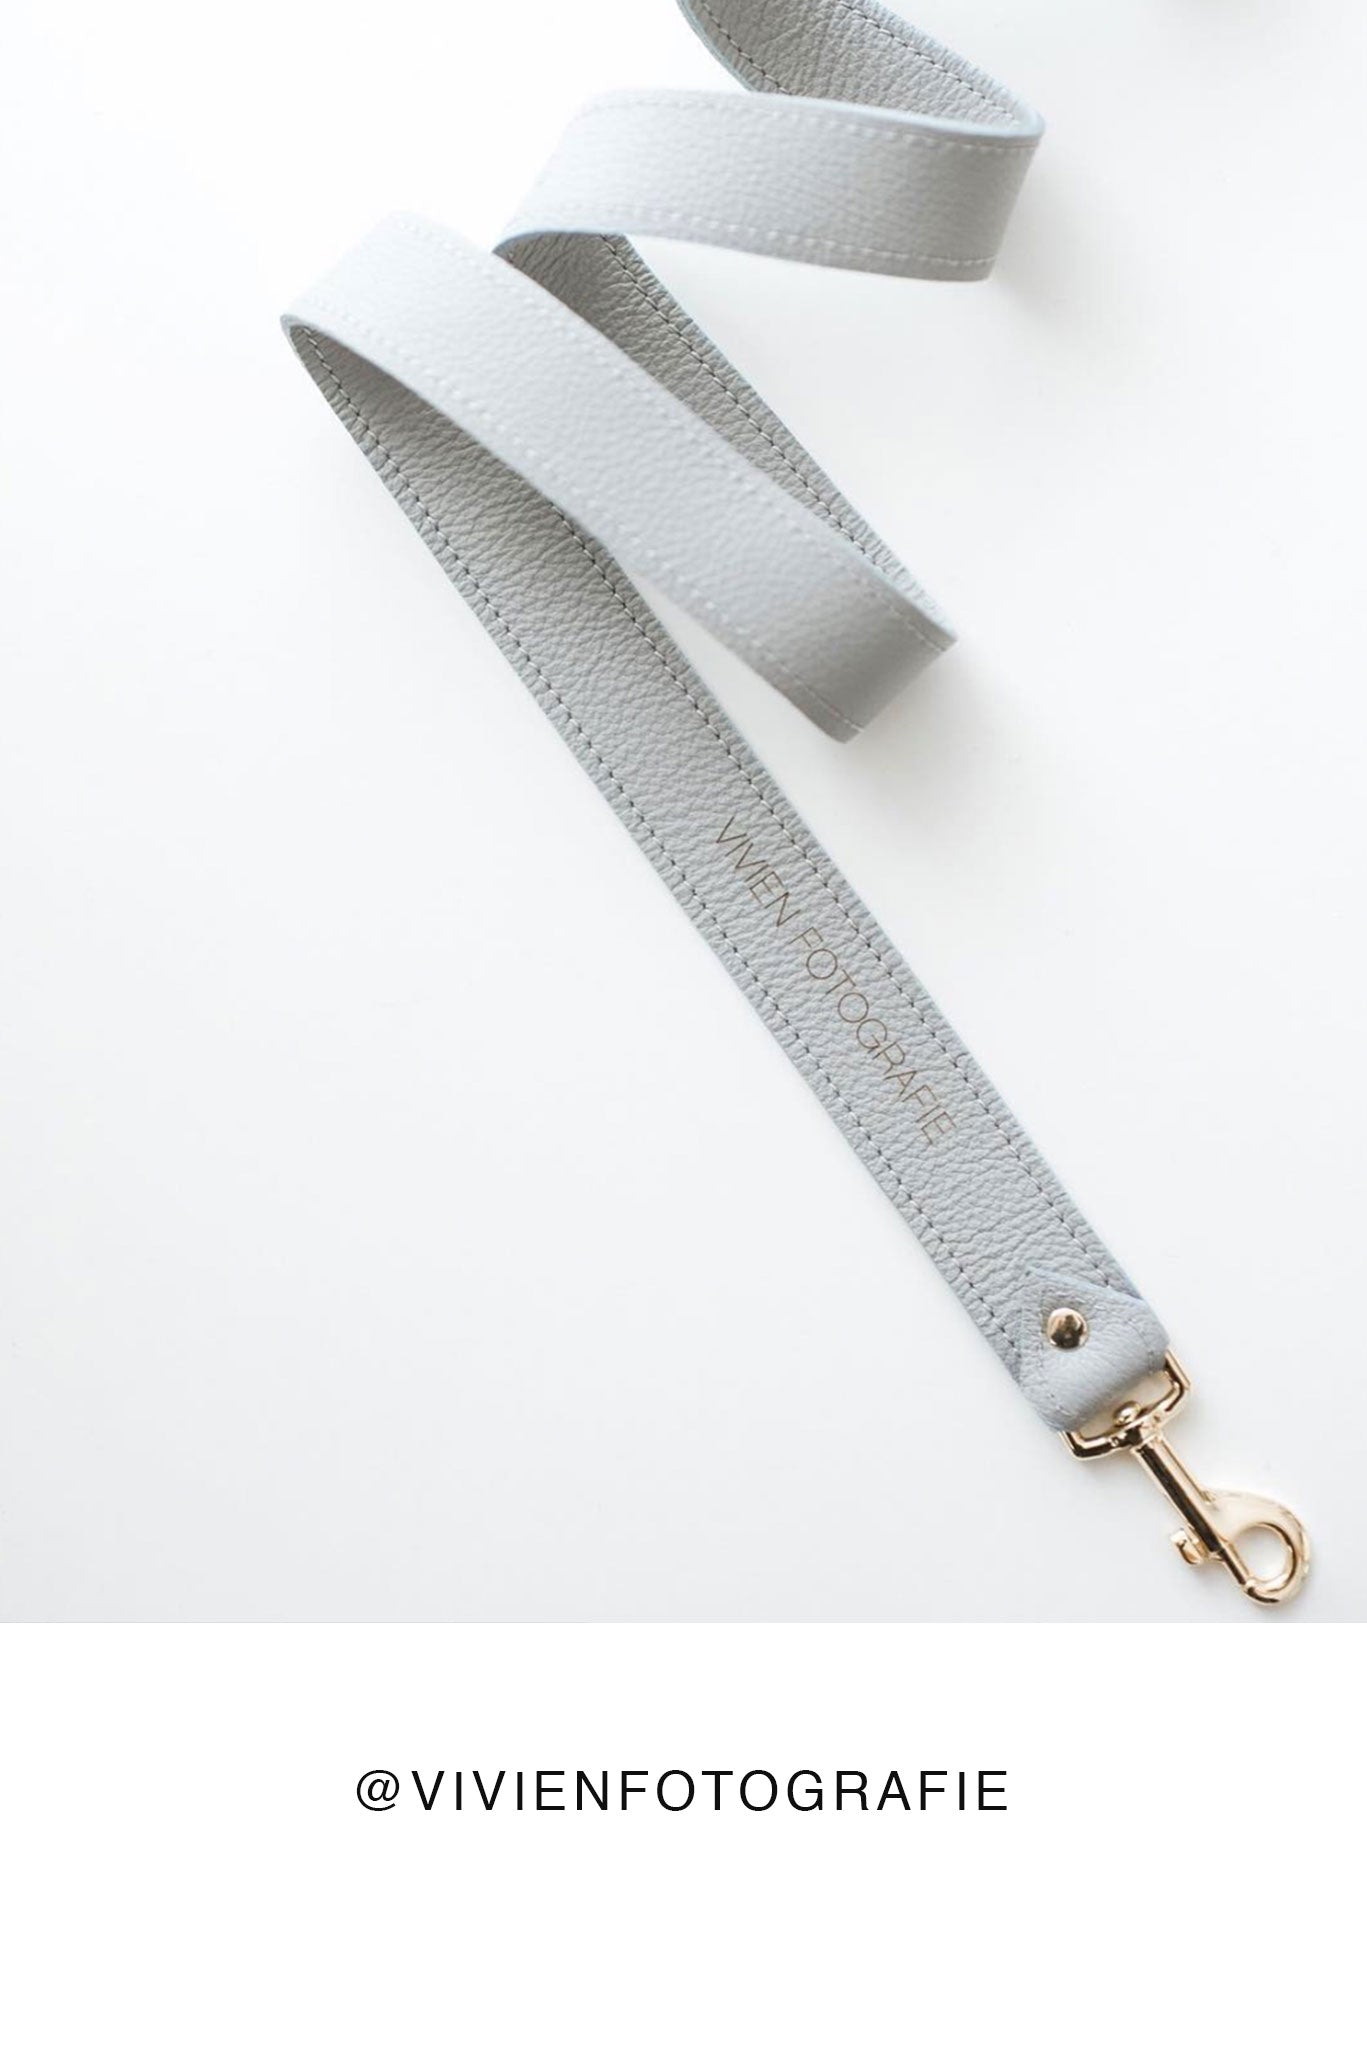 FOTO | The Designer in Dove - a dove grey genuine pebbled leather camera strap that can be personalized with a monogram or business logo, making this leather camera strap the perfect personalized gift.